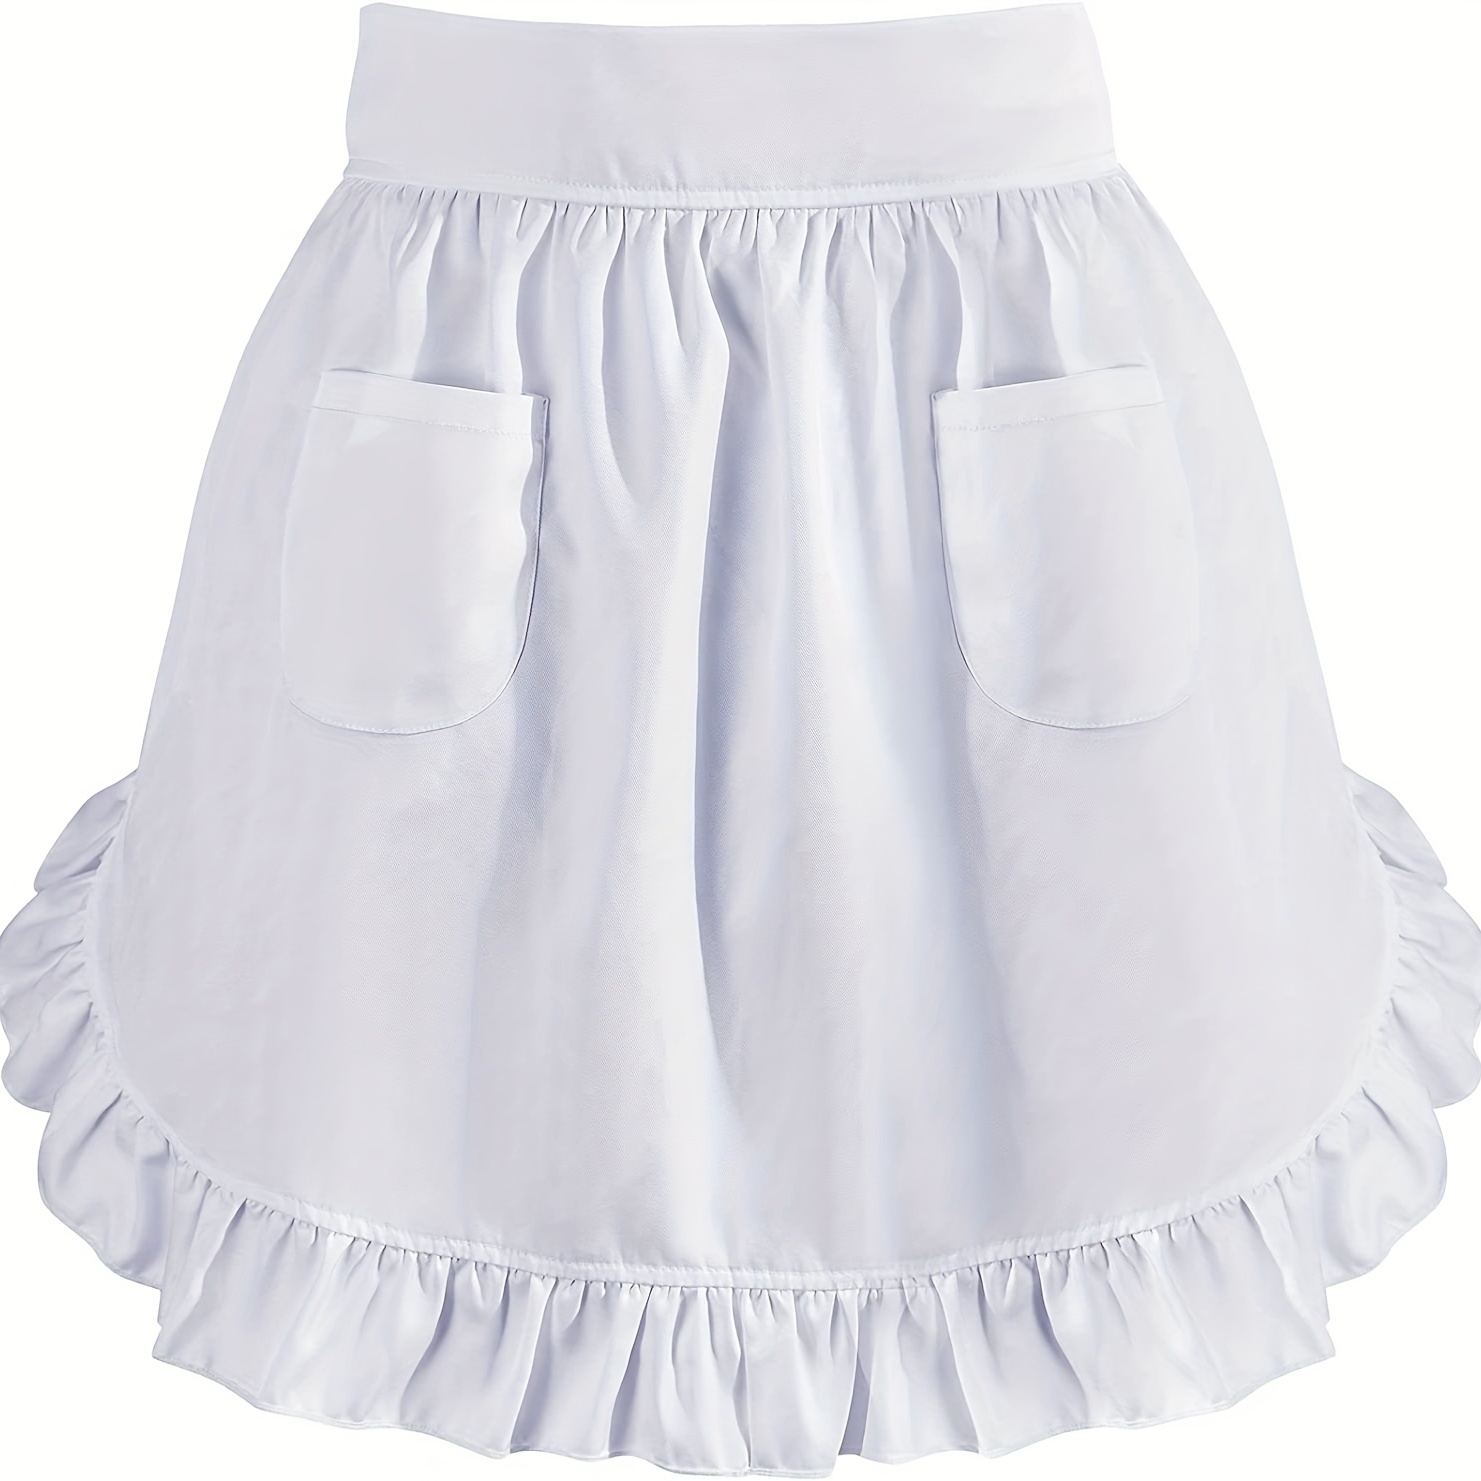 Best Sellers-retro Ruffle Apron Fancy Cute White Apron For Kitchen Cooking  Baking Cleaning Maid Costume Frilly Adorable Waitress Aprons Vintage Costum